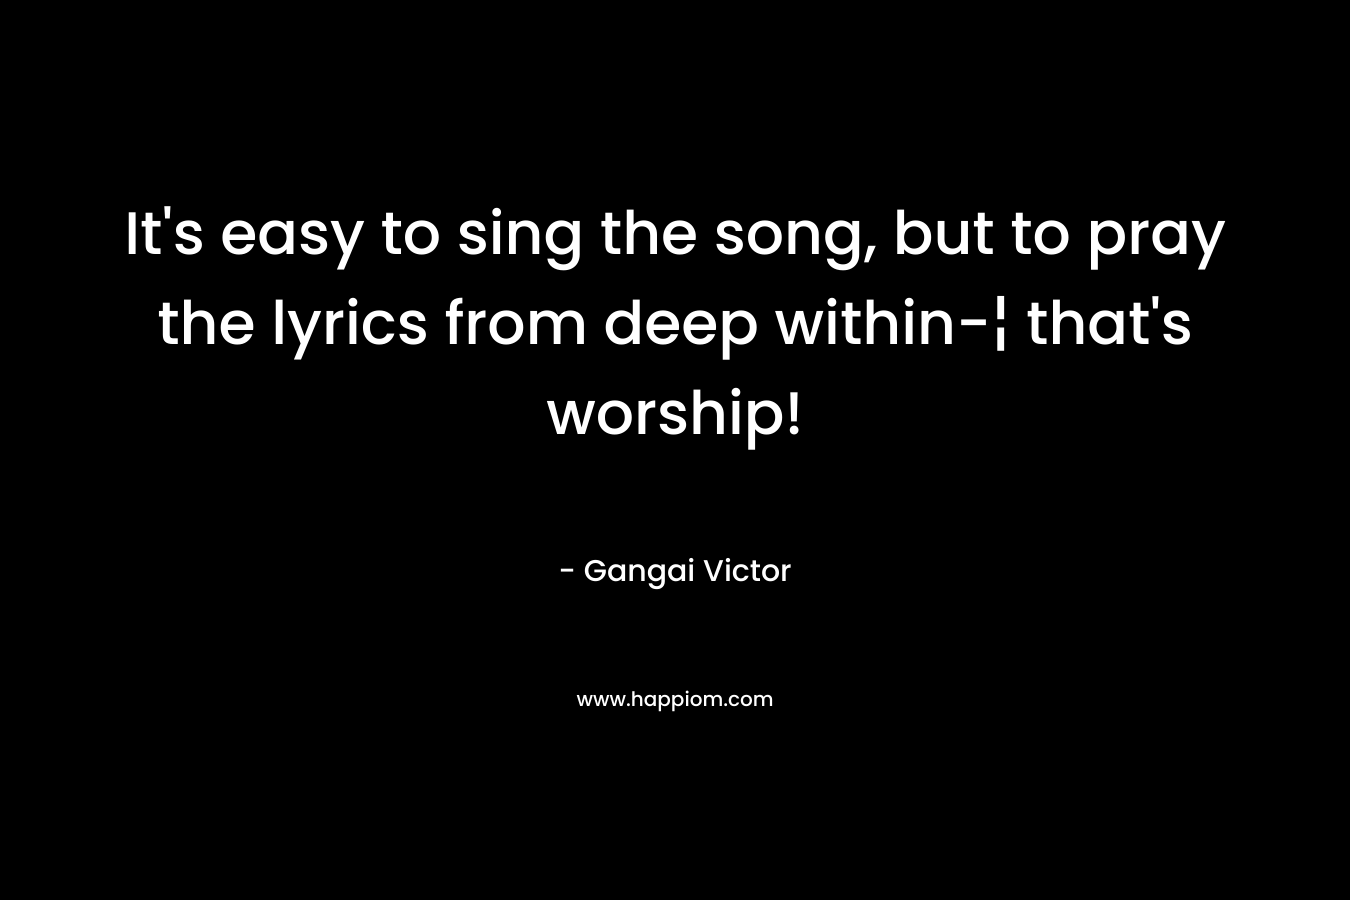 It’s easy to sing the song, but to pray the lyrics from deep within-¦ that’s worship! – Gangai Victor